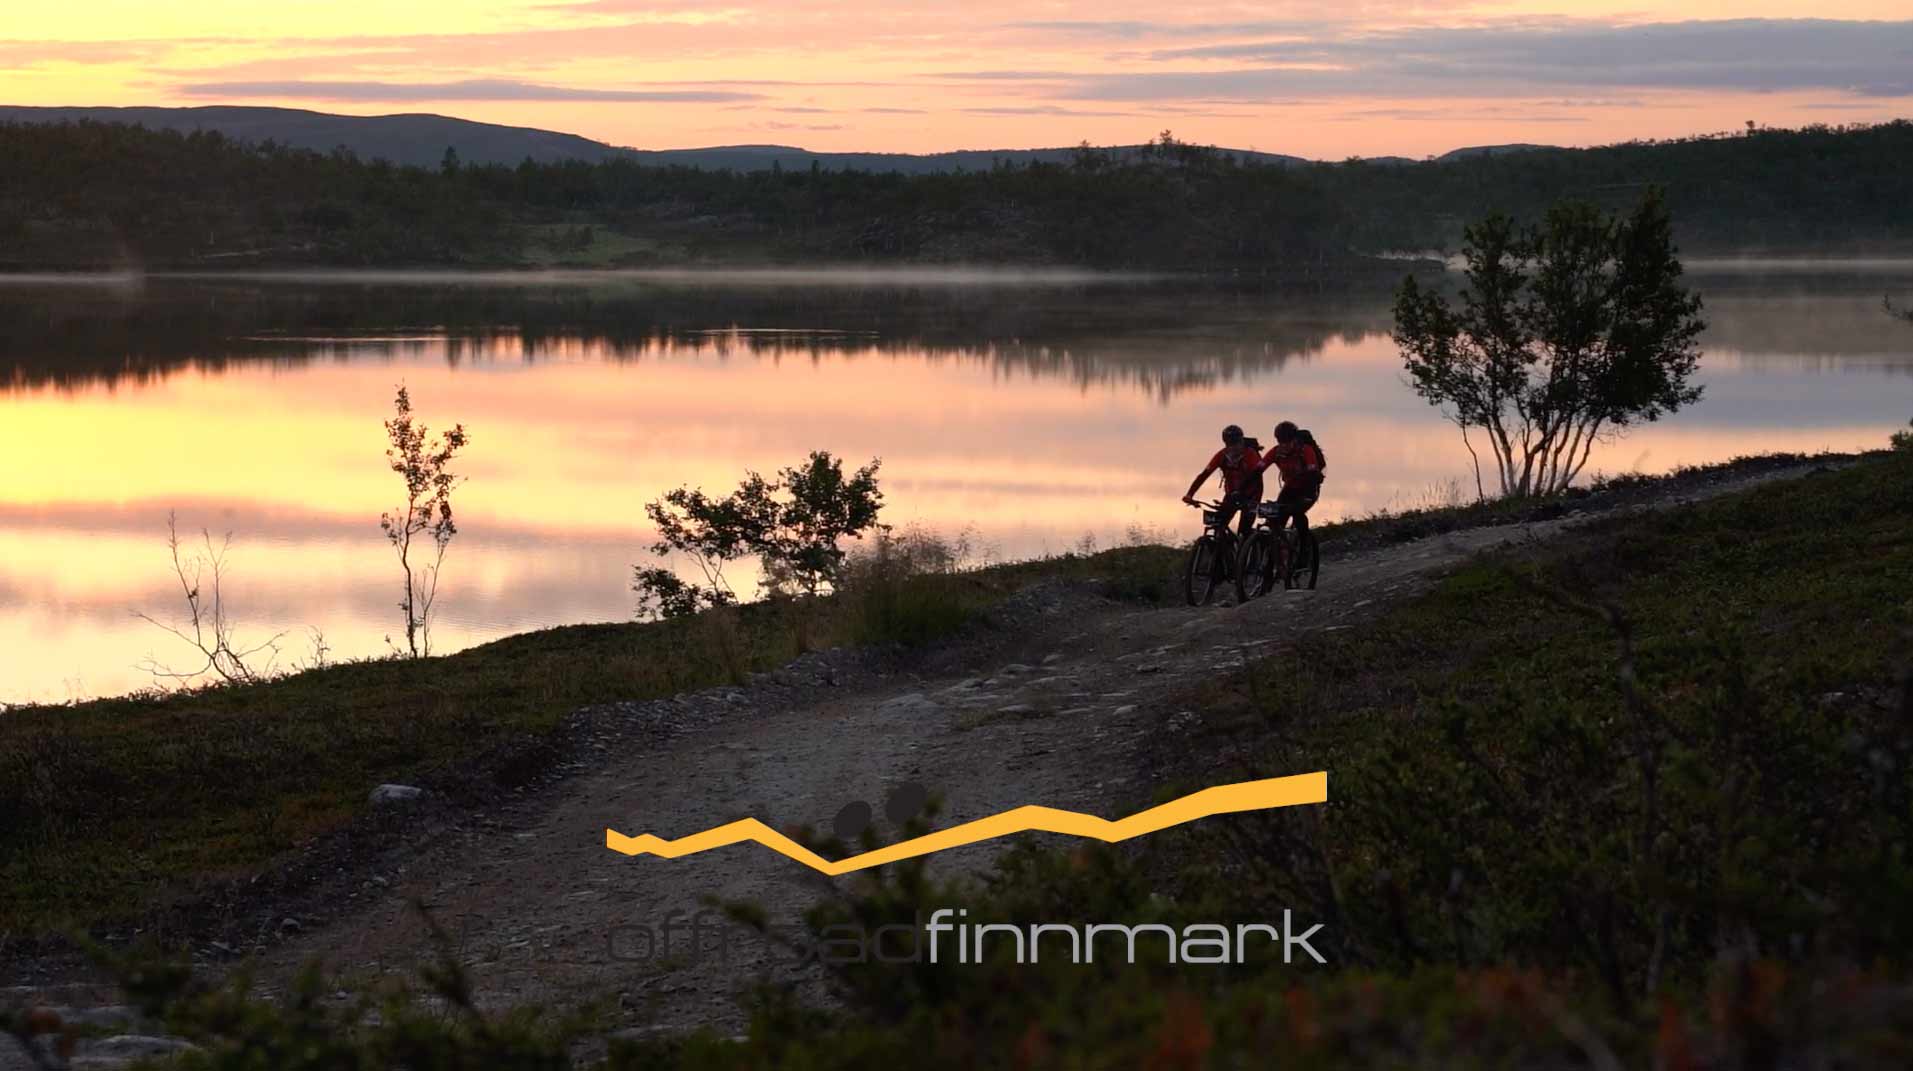 Featured image for “Le documentaire Offroad Finnmark”